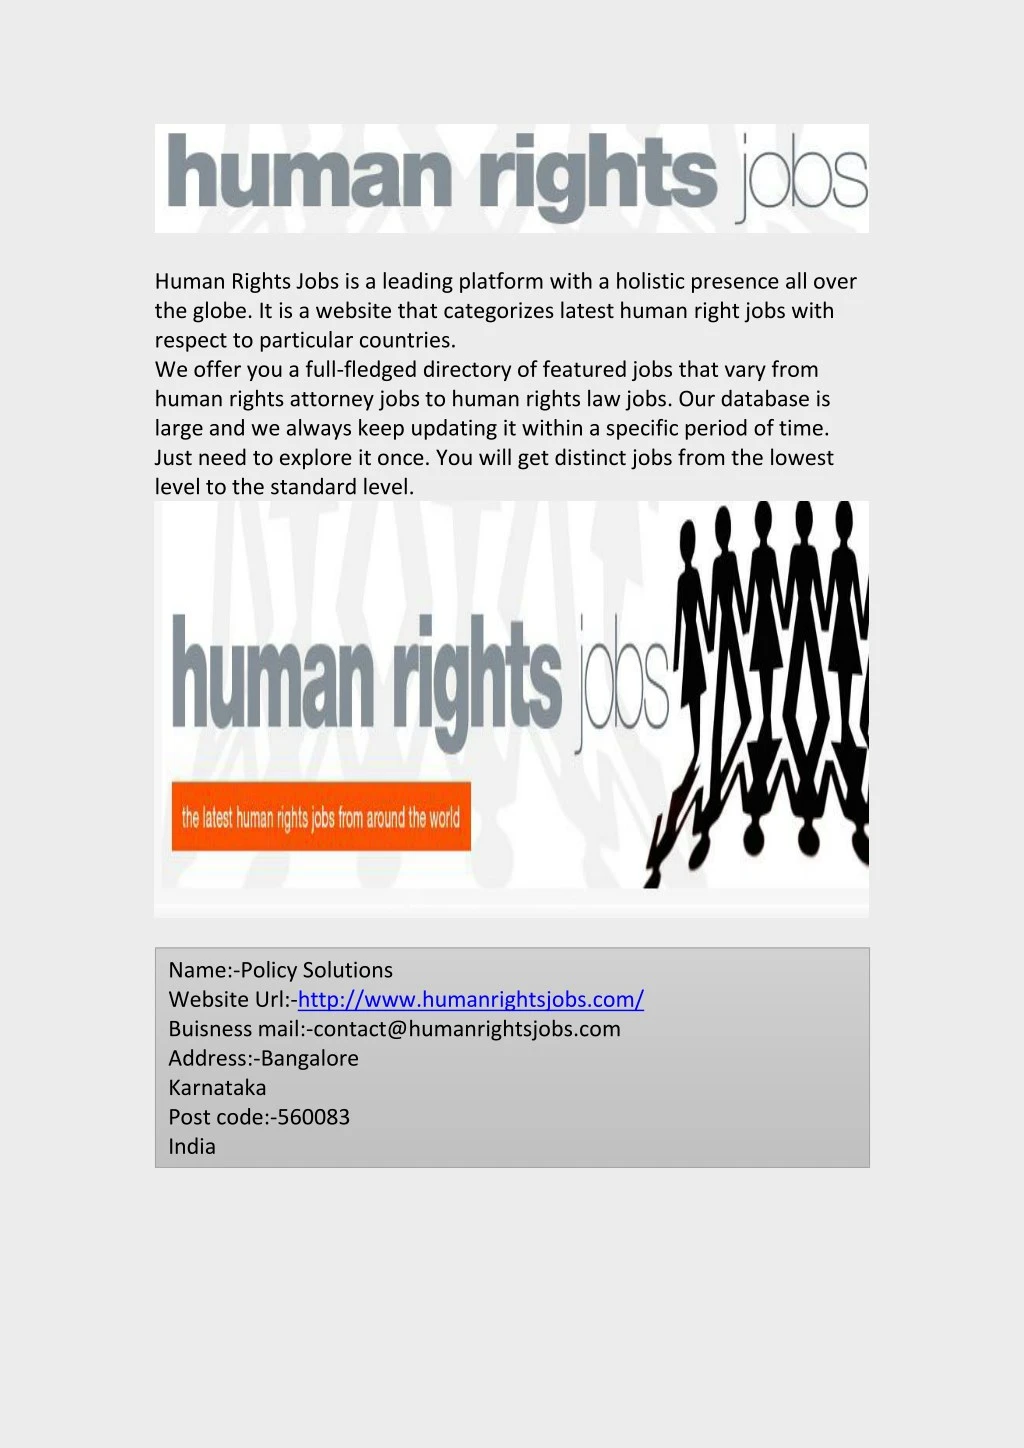 human rights jobs is a leading platform with